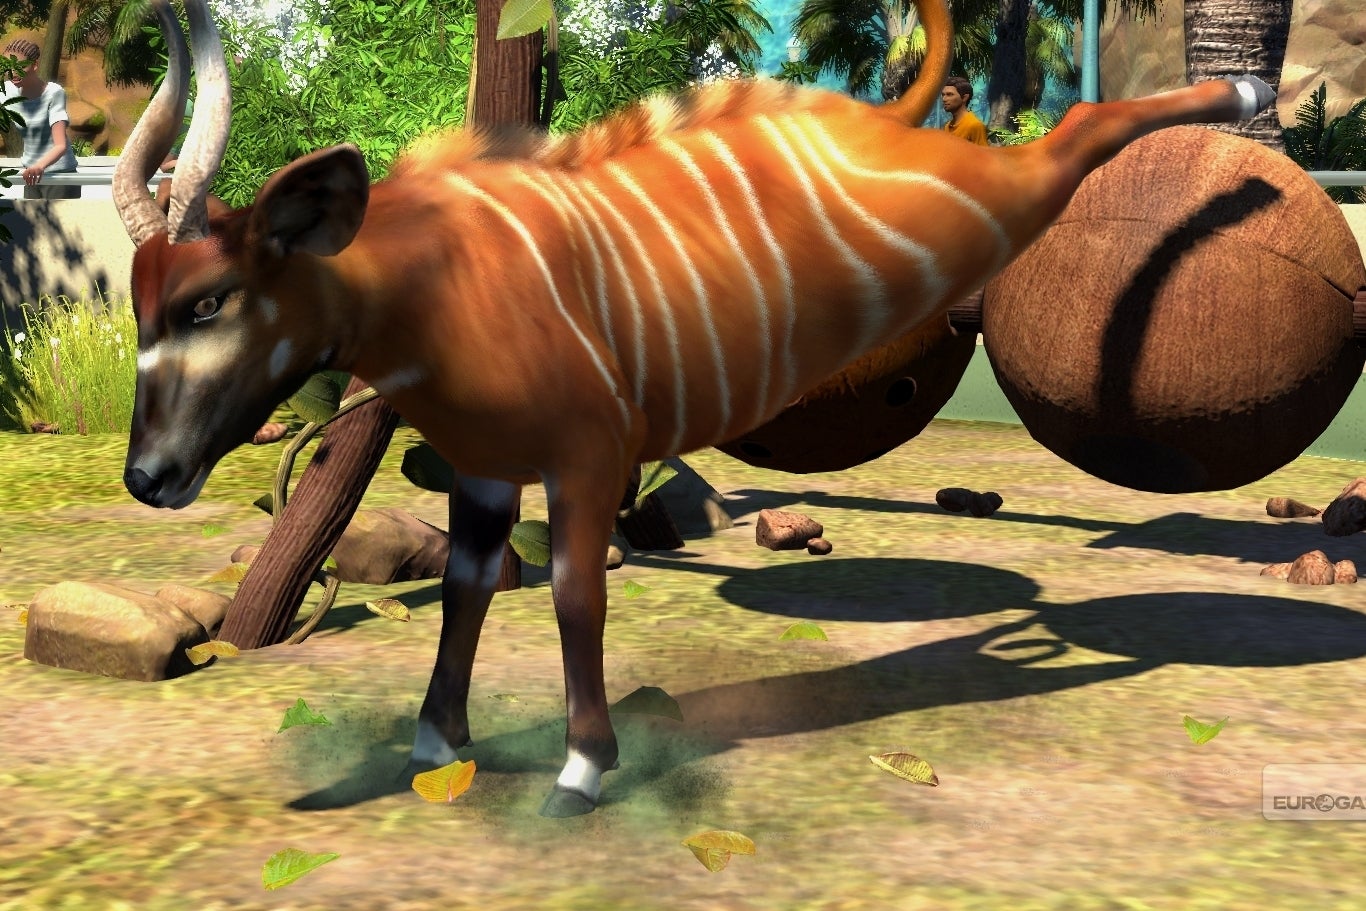 Image for Zoo Tycoon community challenge to help endangered animals